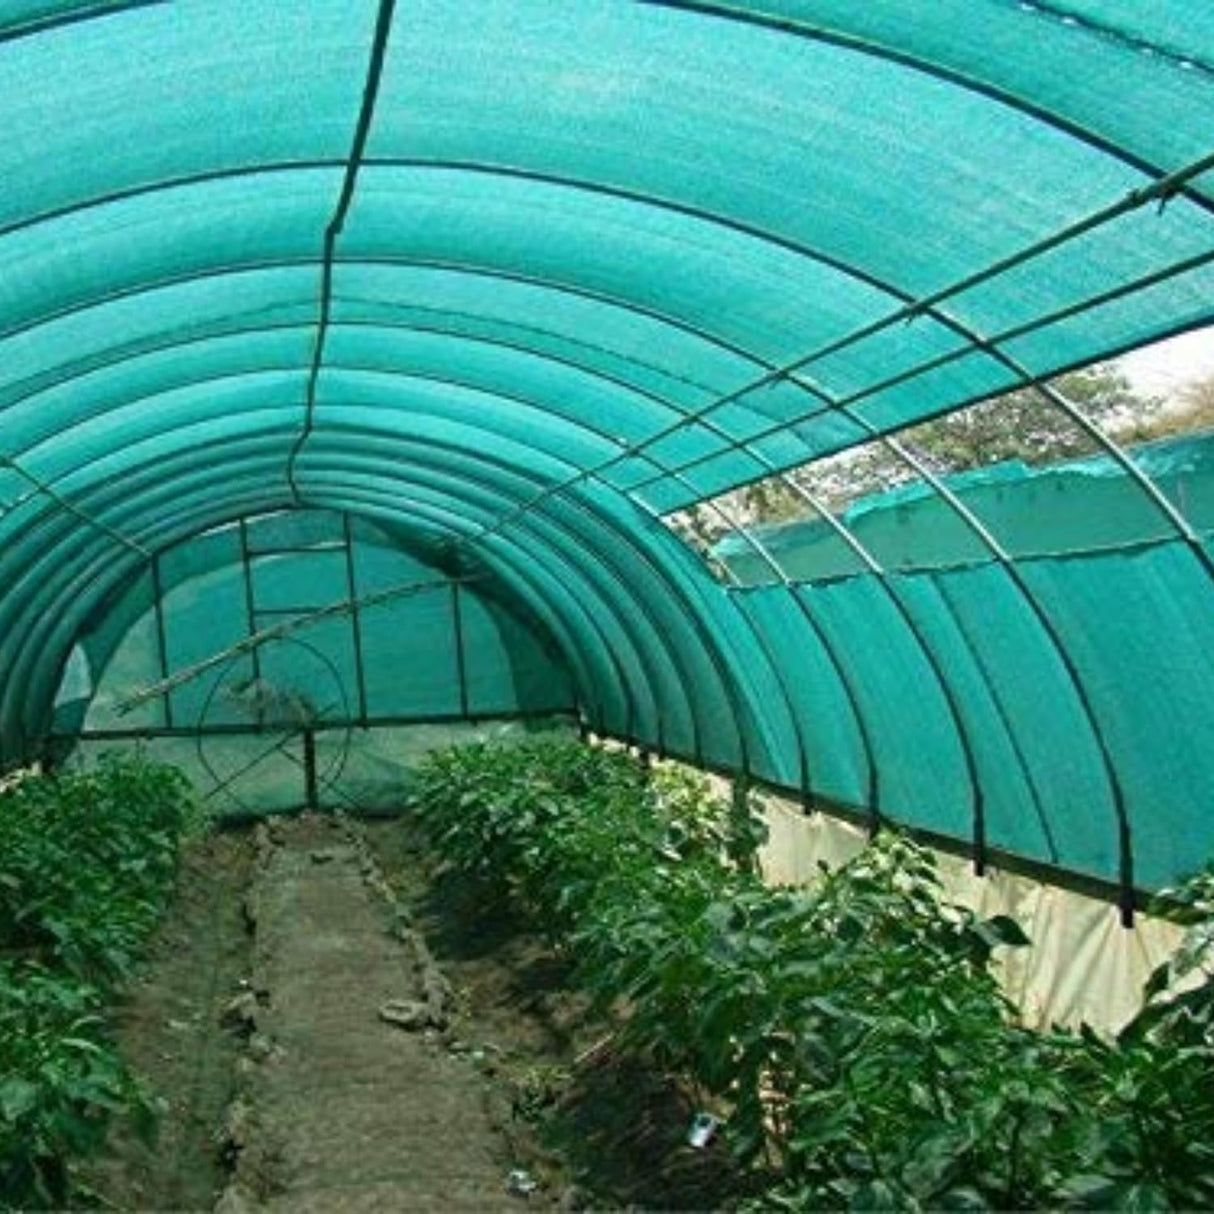 Singhal Stabilized Agro Green House Net Garden Shade - 3X5 M - Green (3x5 Meter) HDPE 50% UV Protected Multipurpose with Attached Eyelets on Every Meter